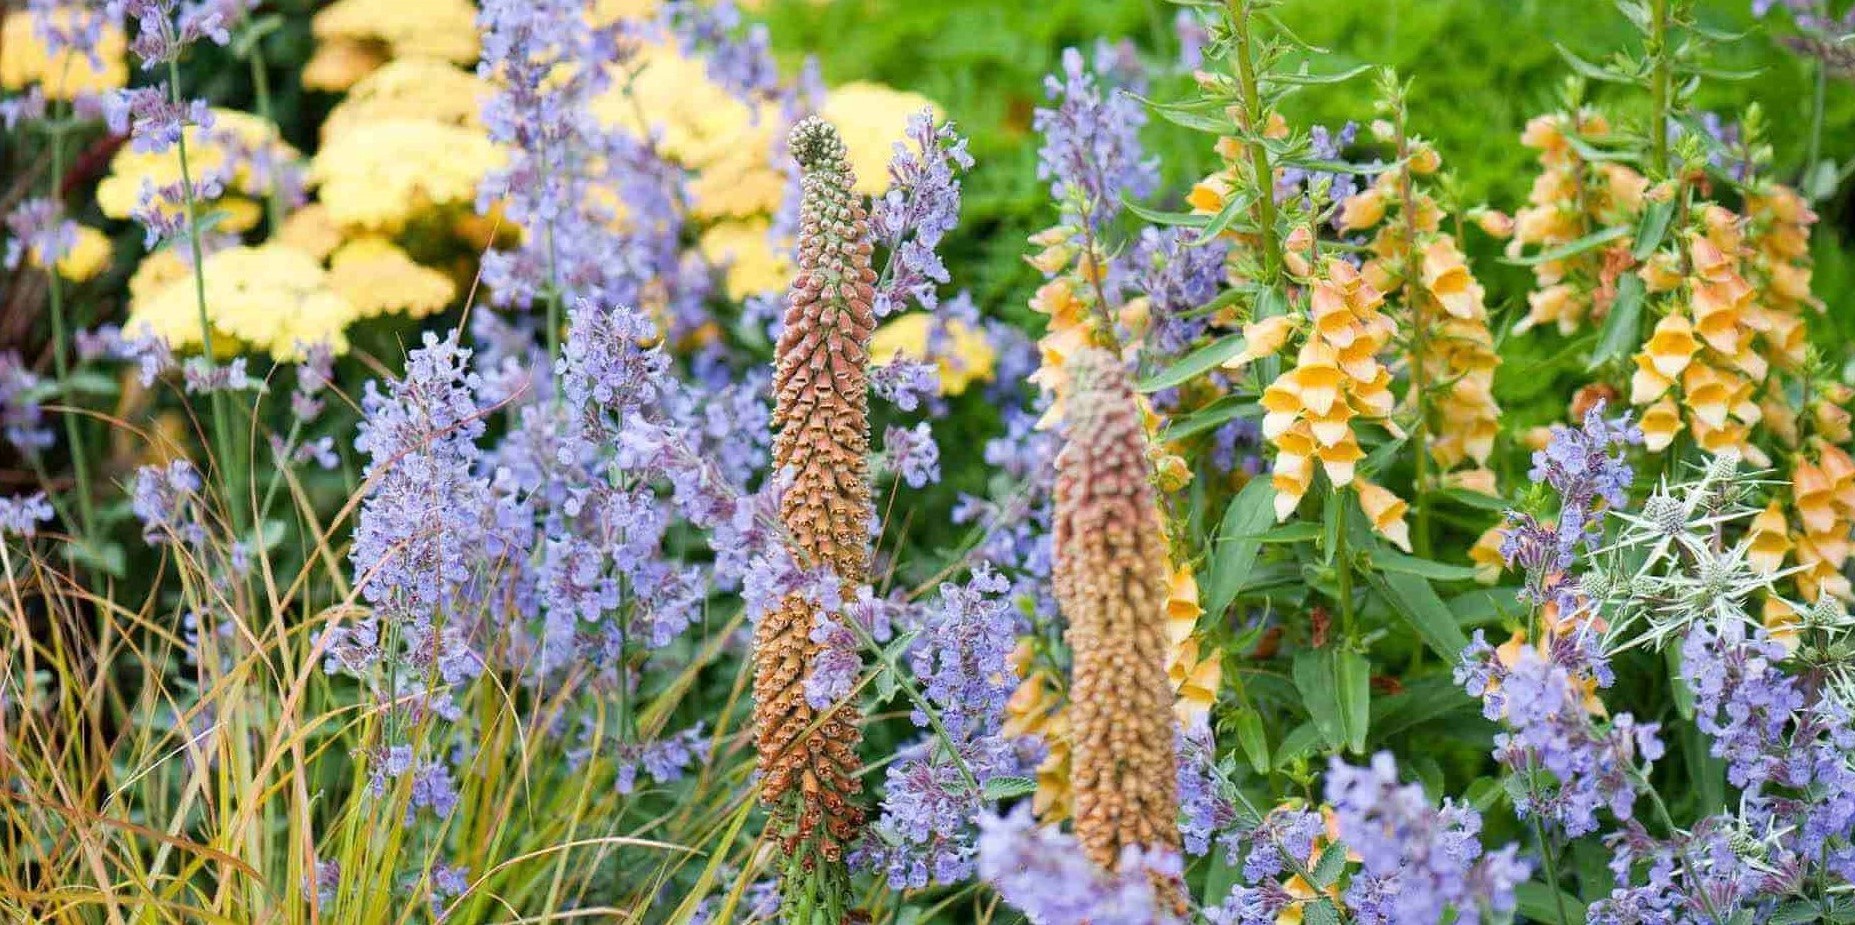 What Are Perennials?